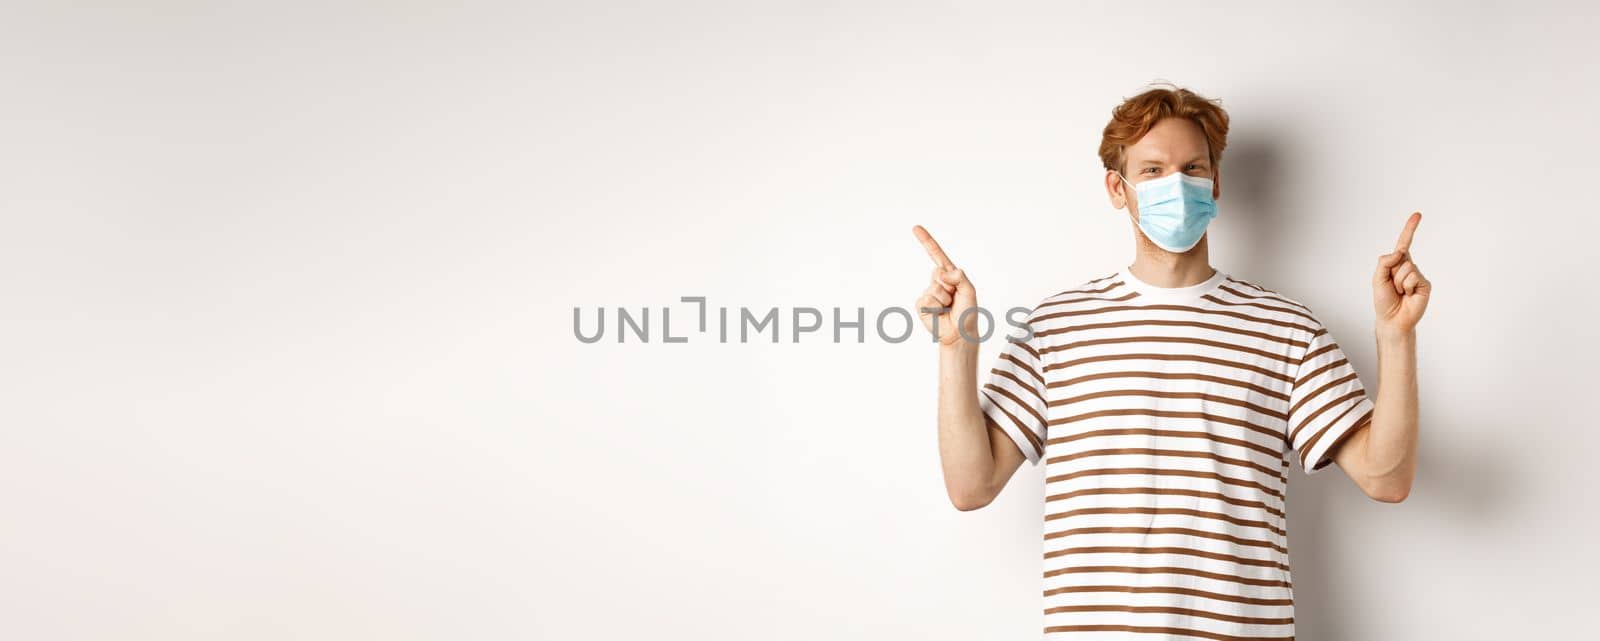 Covid, virus and social distancing concept. Handsome young man with red hair, wear face mask and pointing sideways at two promo offers, white background.